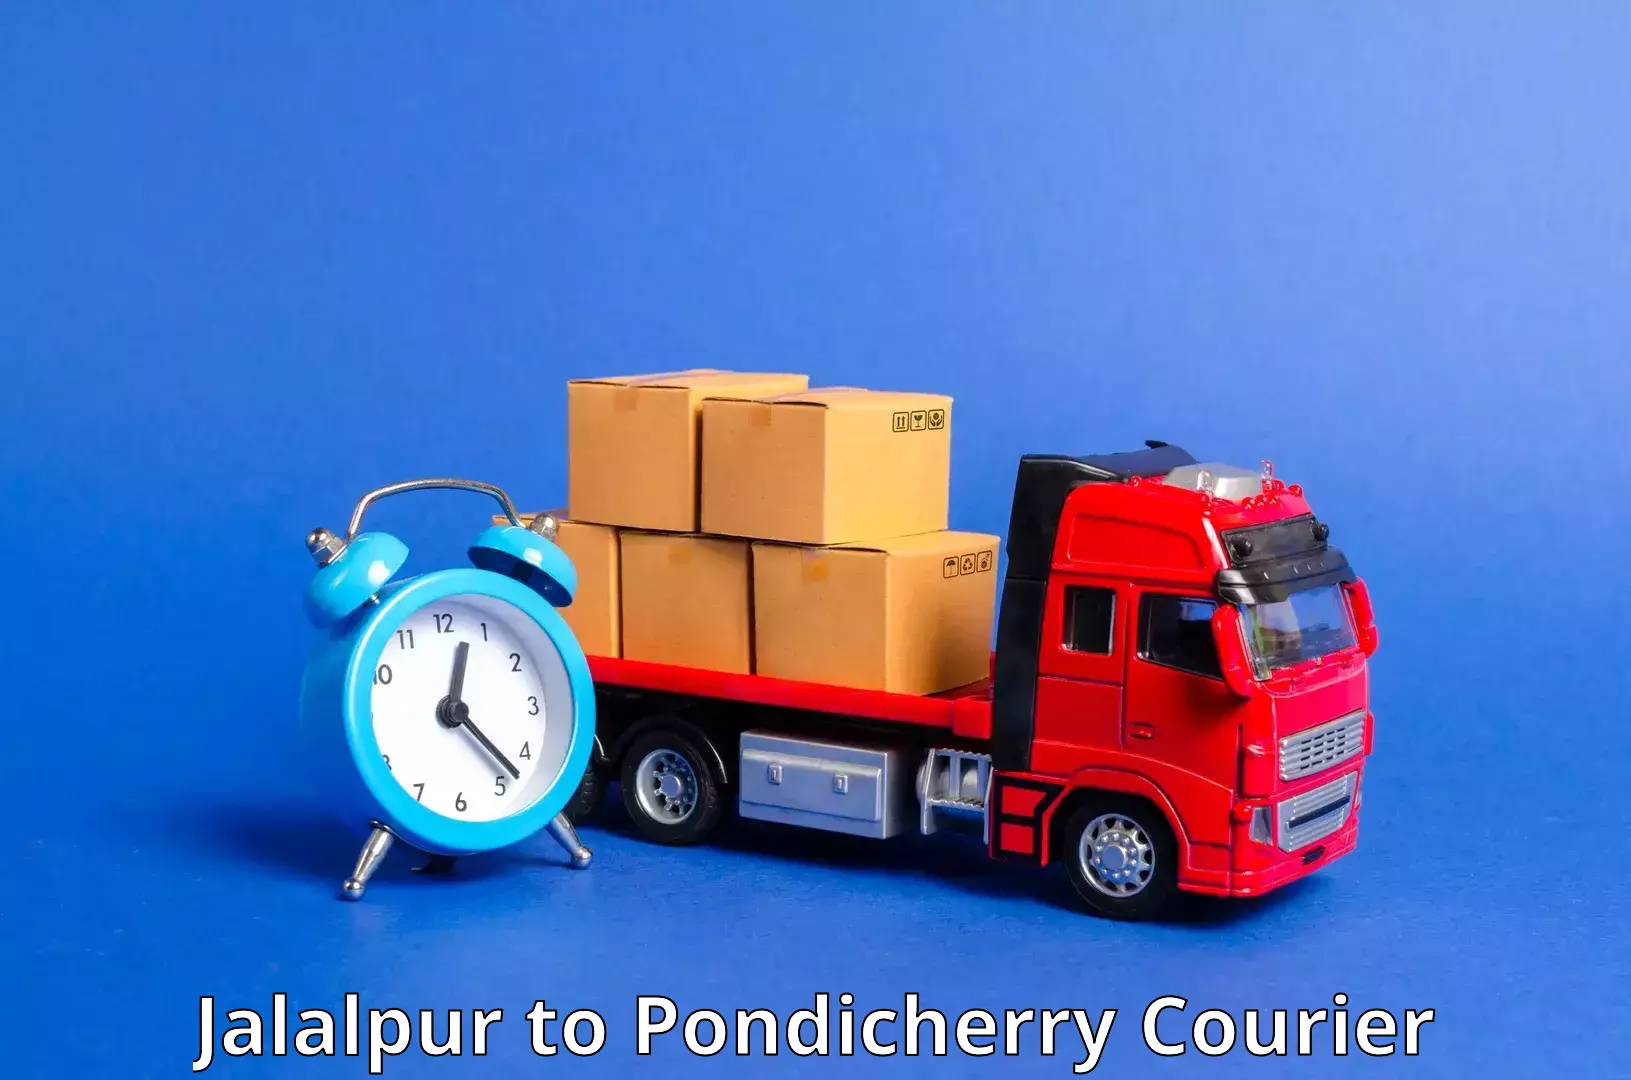 Subscription-based courier Jalalpur to Pondicherry